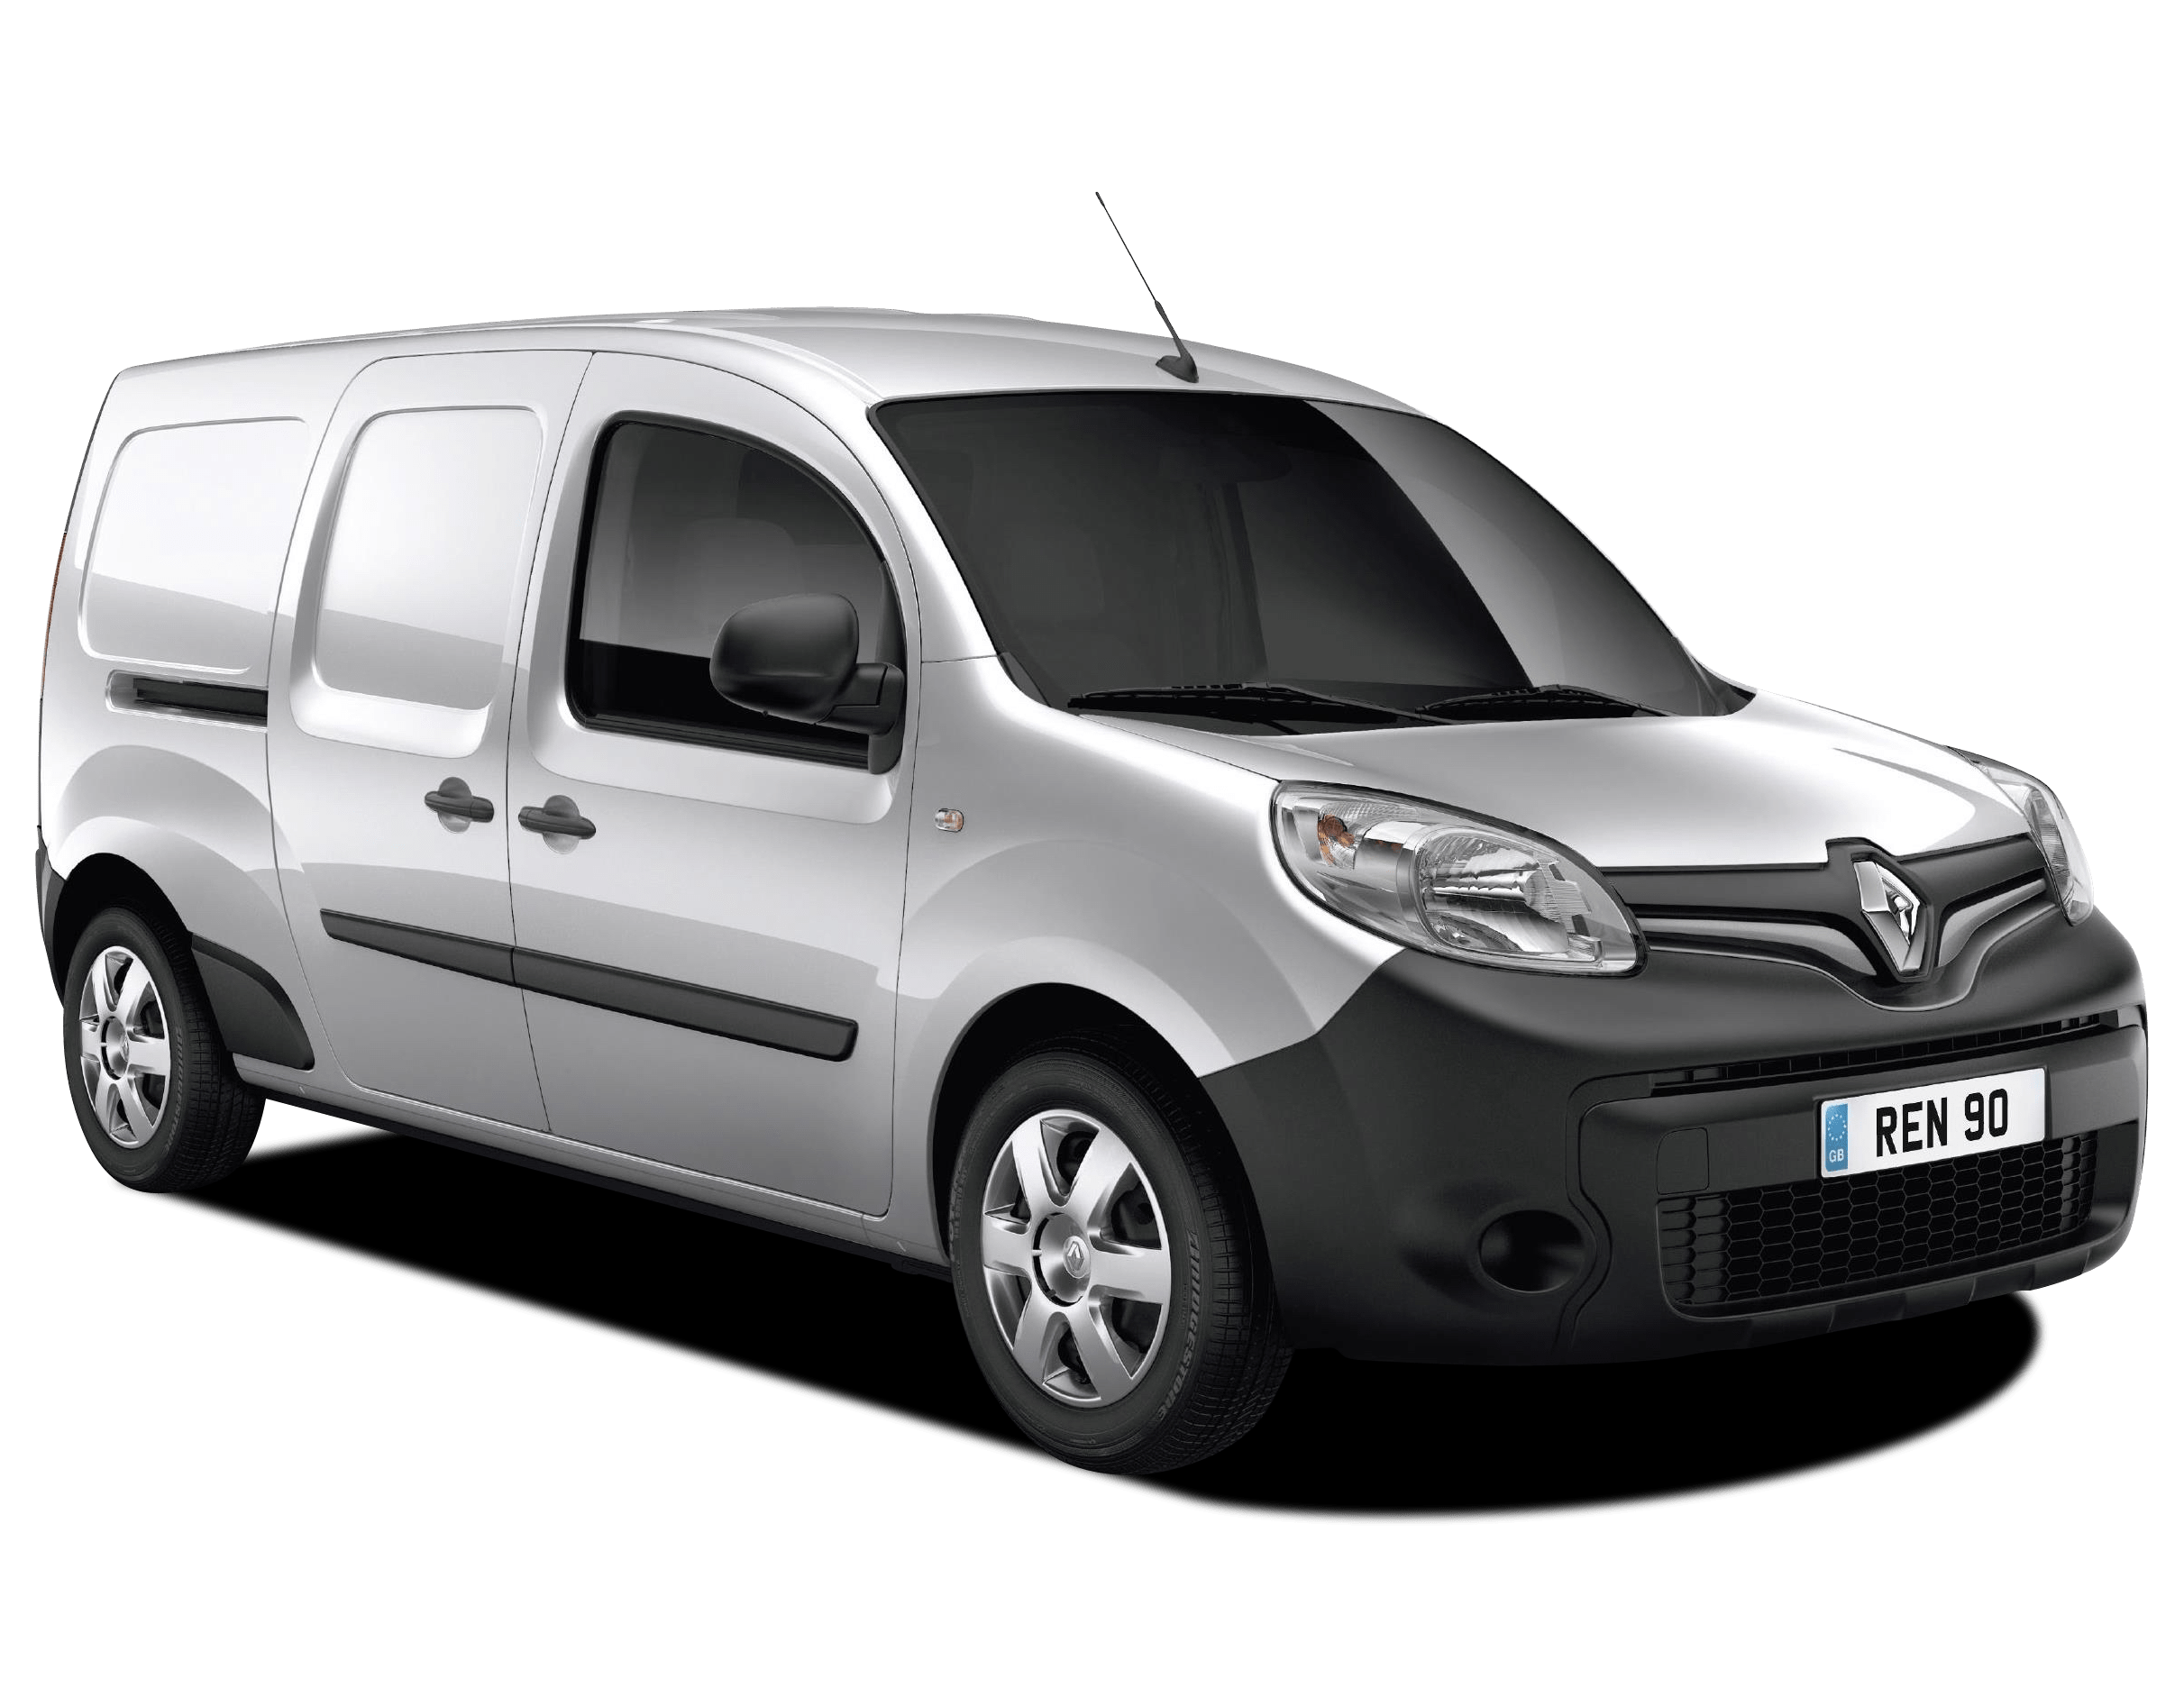 https://carsguide-res.cloudinary.com/image/upload/f_auto,fl_lossy,q_auto,t_default/v1/editorial/vhs/Renault-Kangoo.png